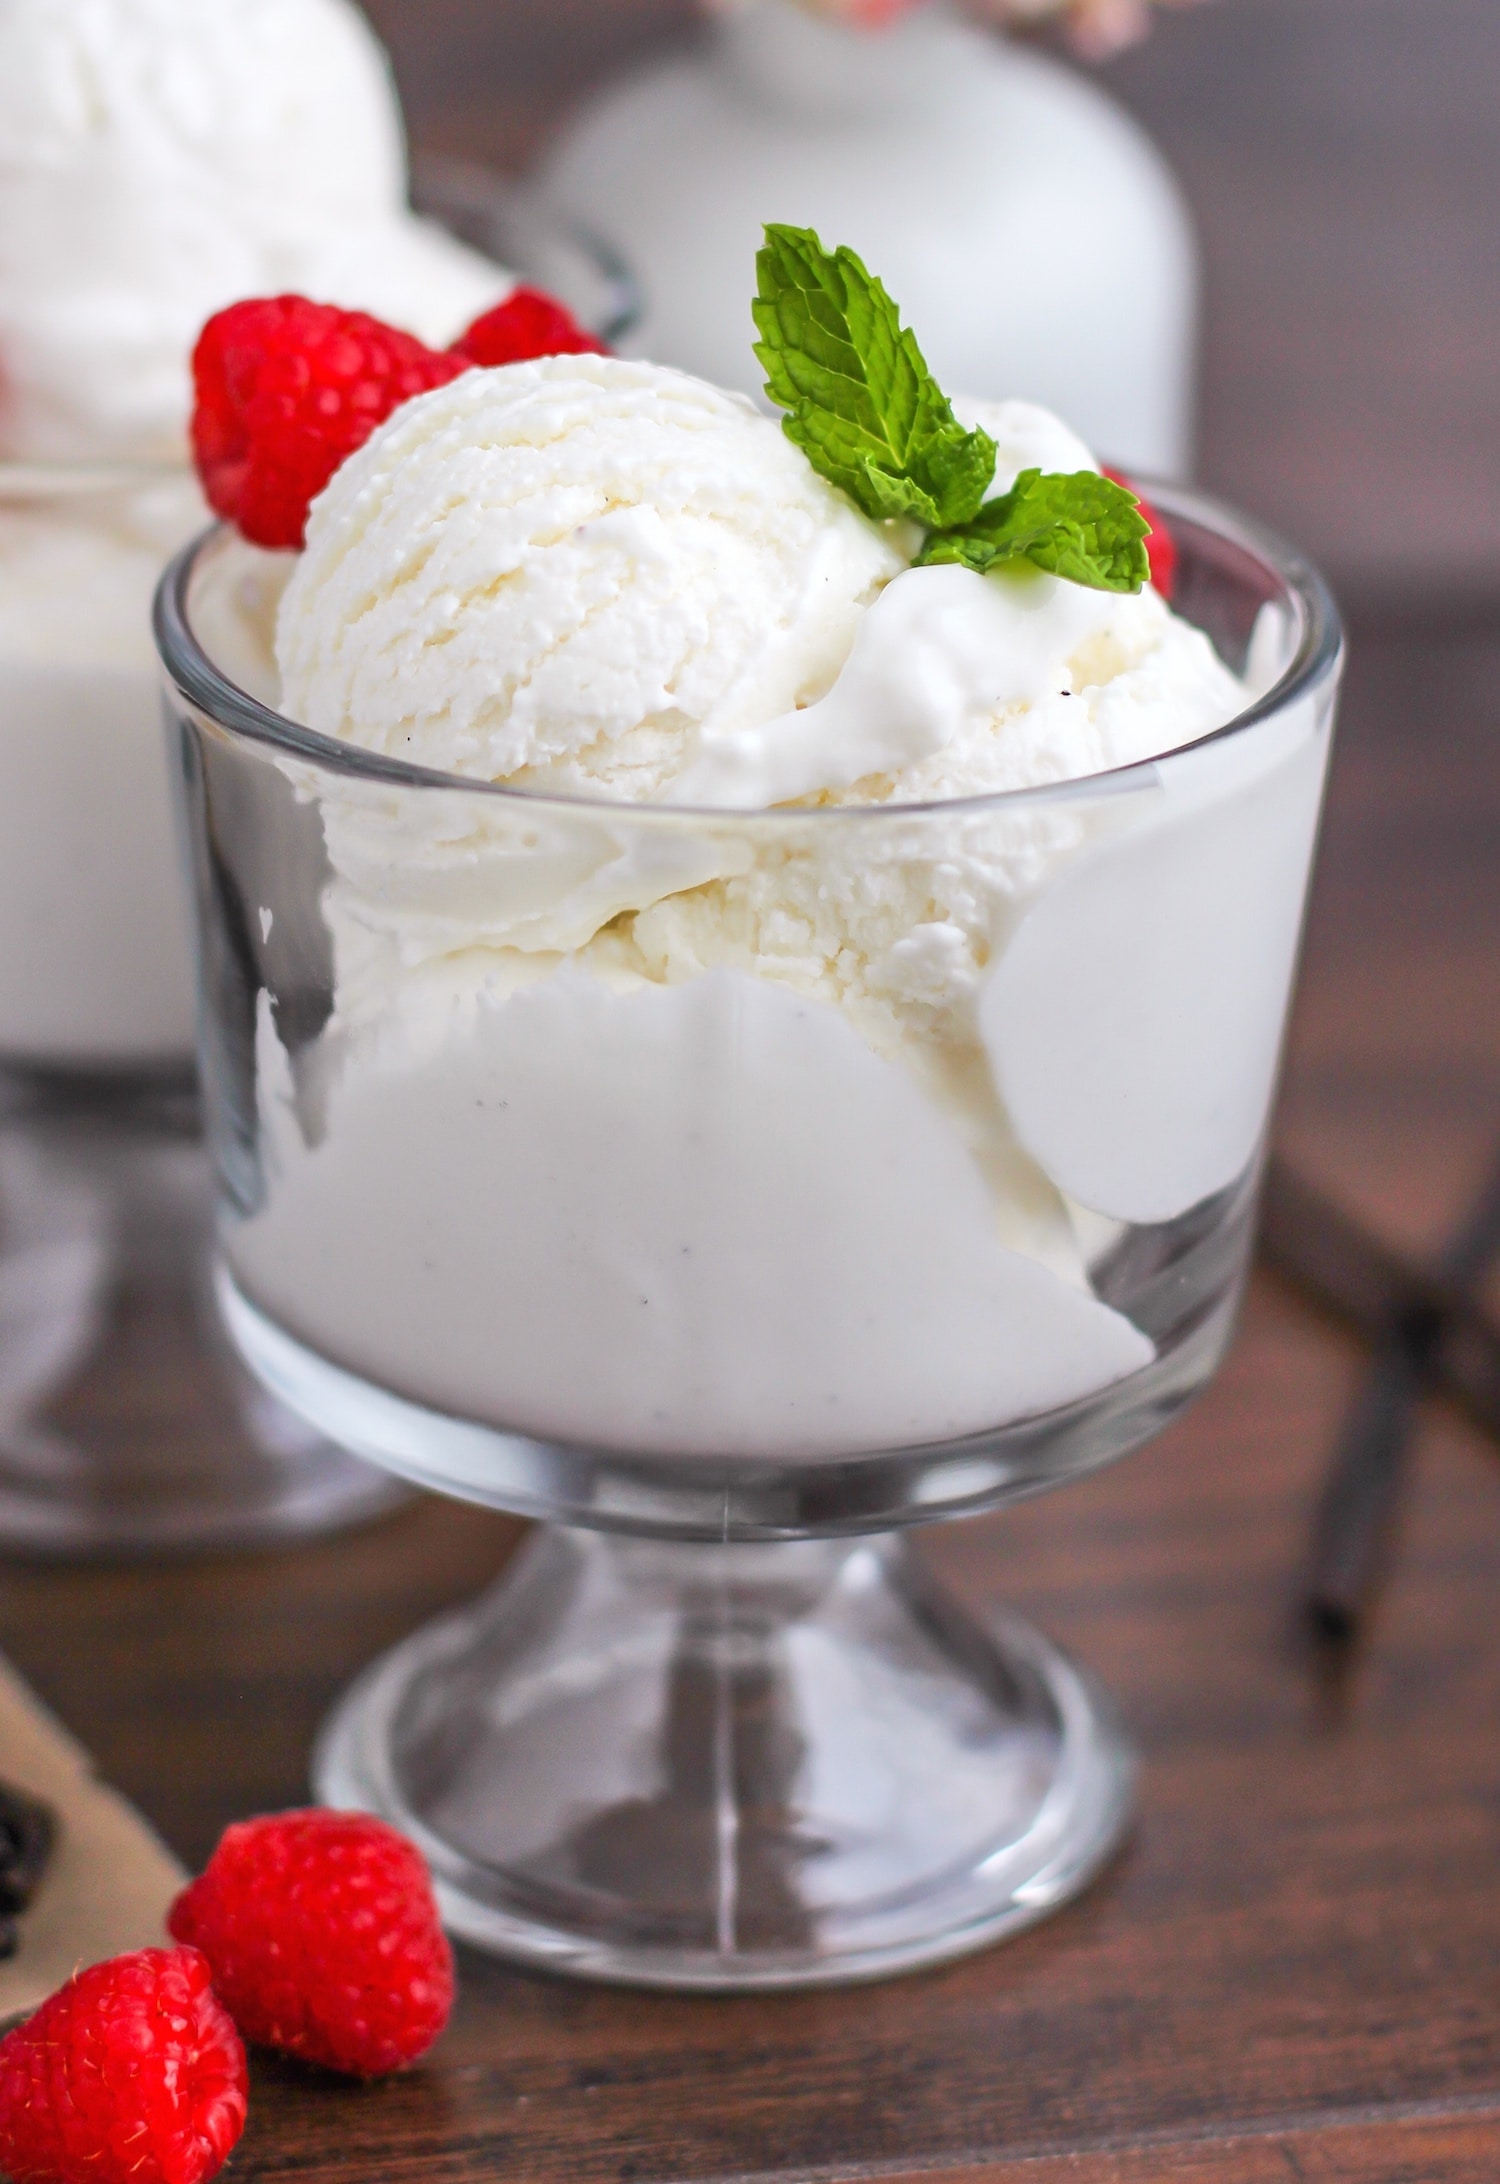 Healthy Homemade Vanilla Bean Ice Cream from the Naughty or Nice Cookbook: The ULTIMATE Healthy Dessert Cookbook